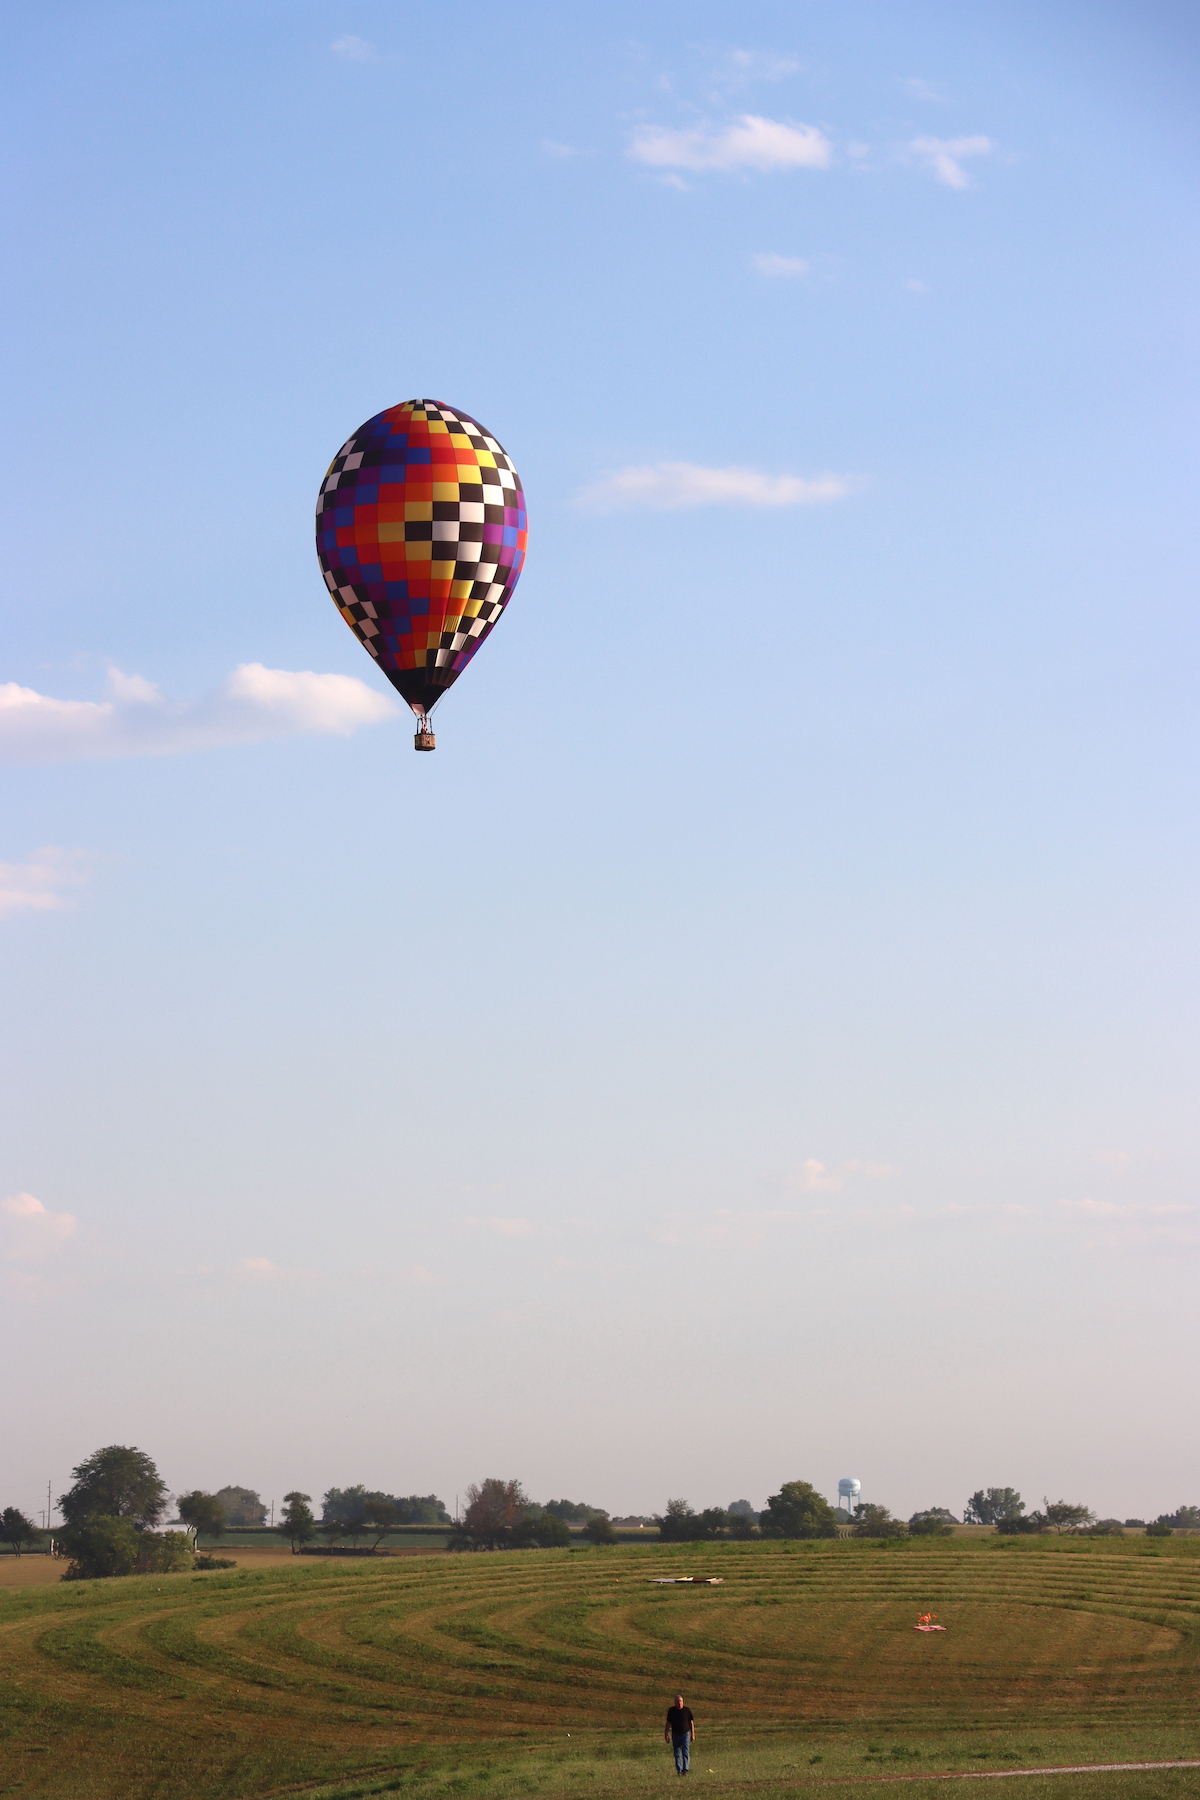 Hot air balloon in the sky over Indianola, Iowa during the National Balloon Classic